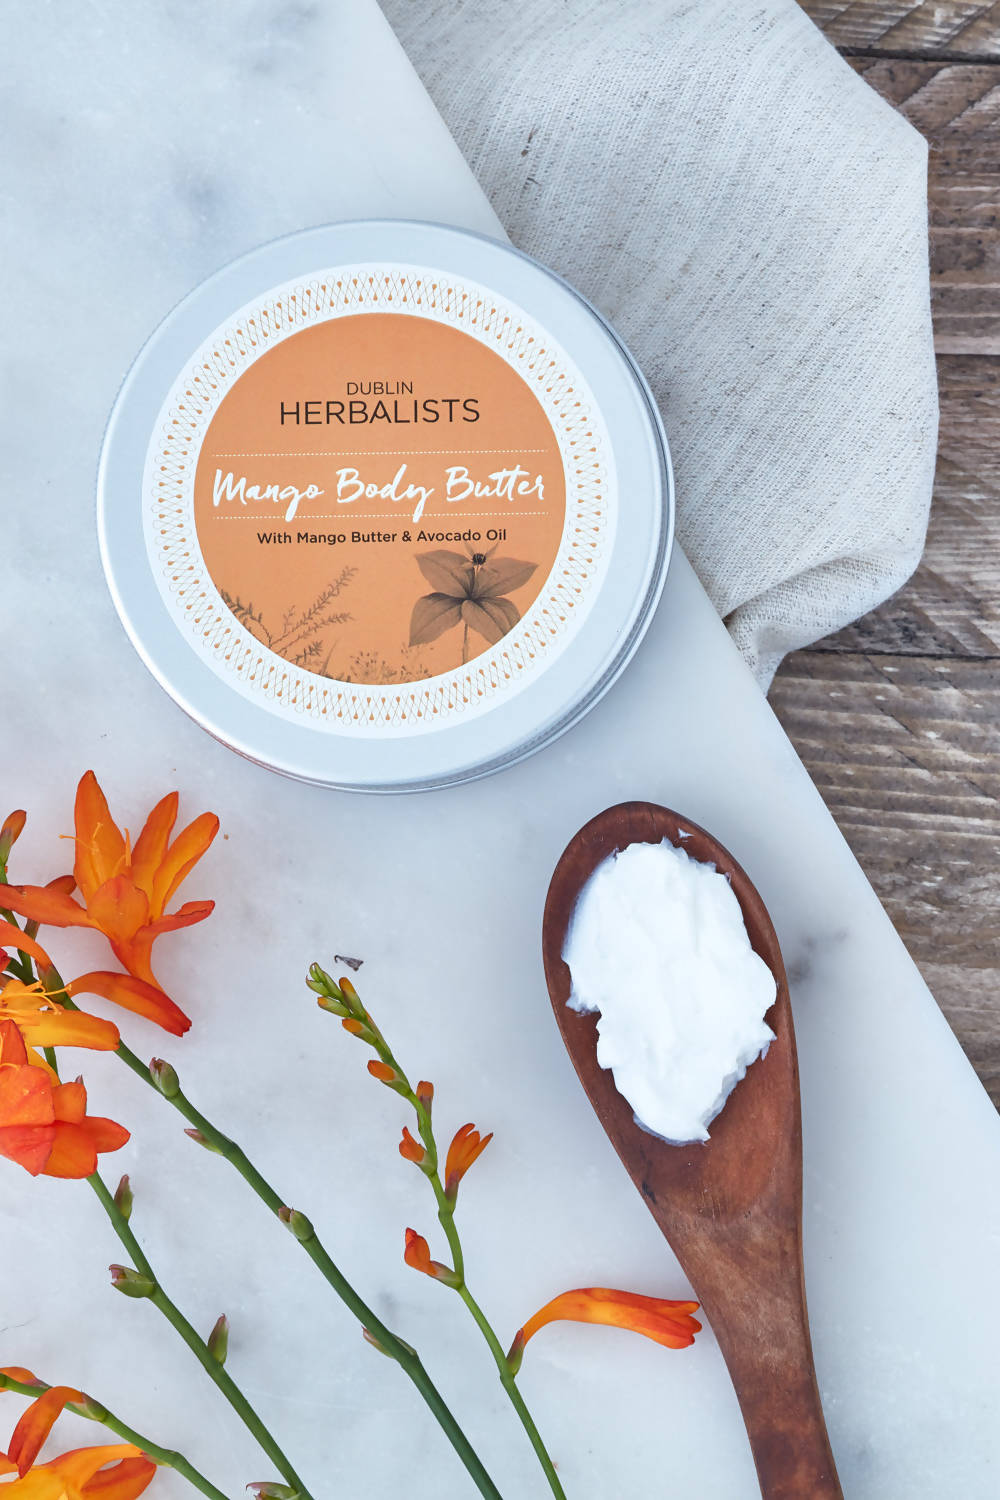 Mango Body Butter- With Mango Butter and Avocado Oil